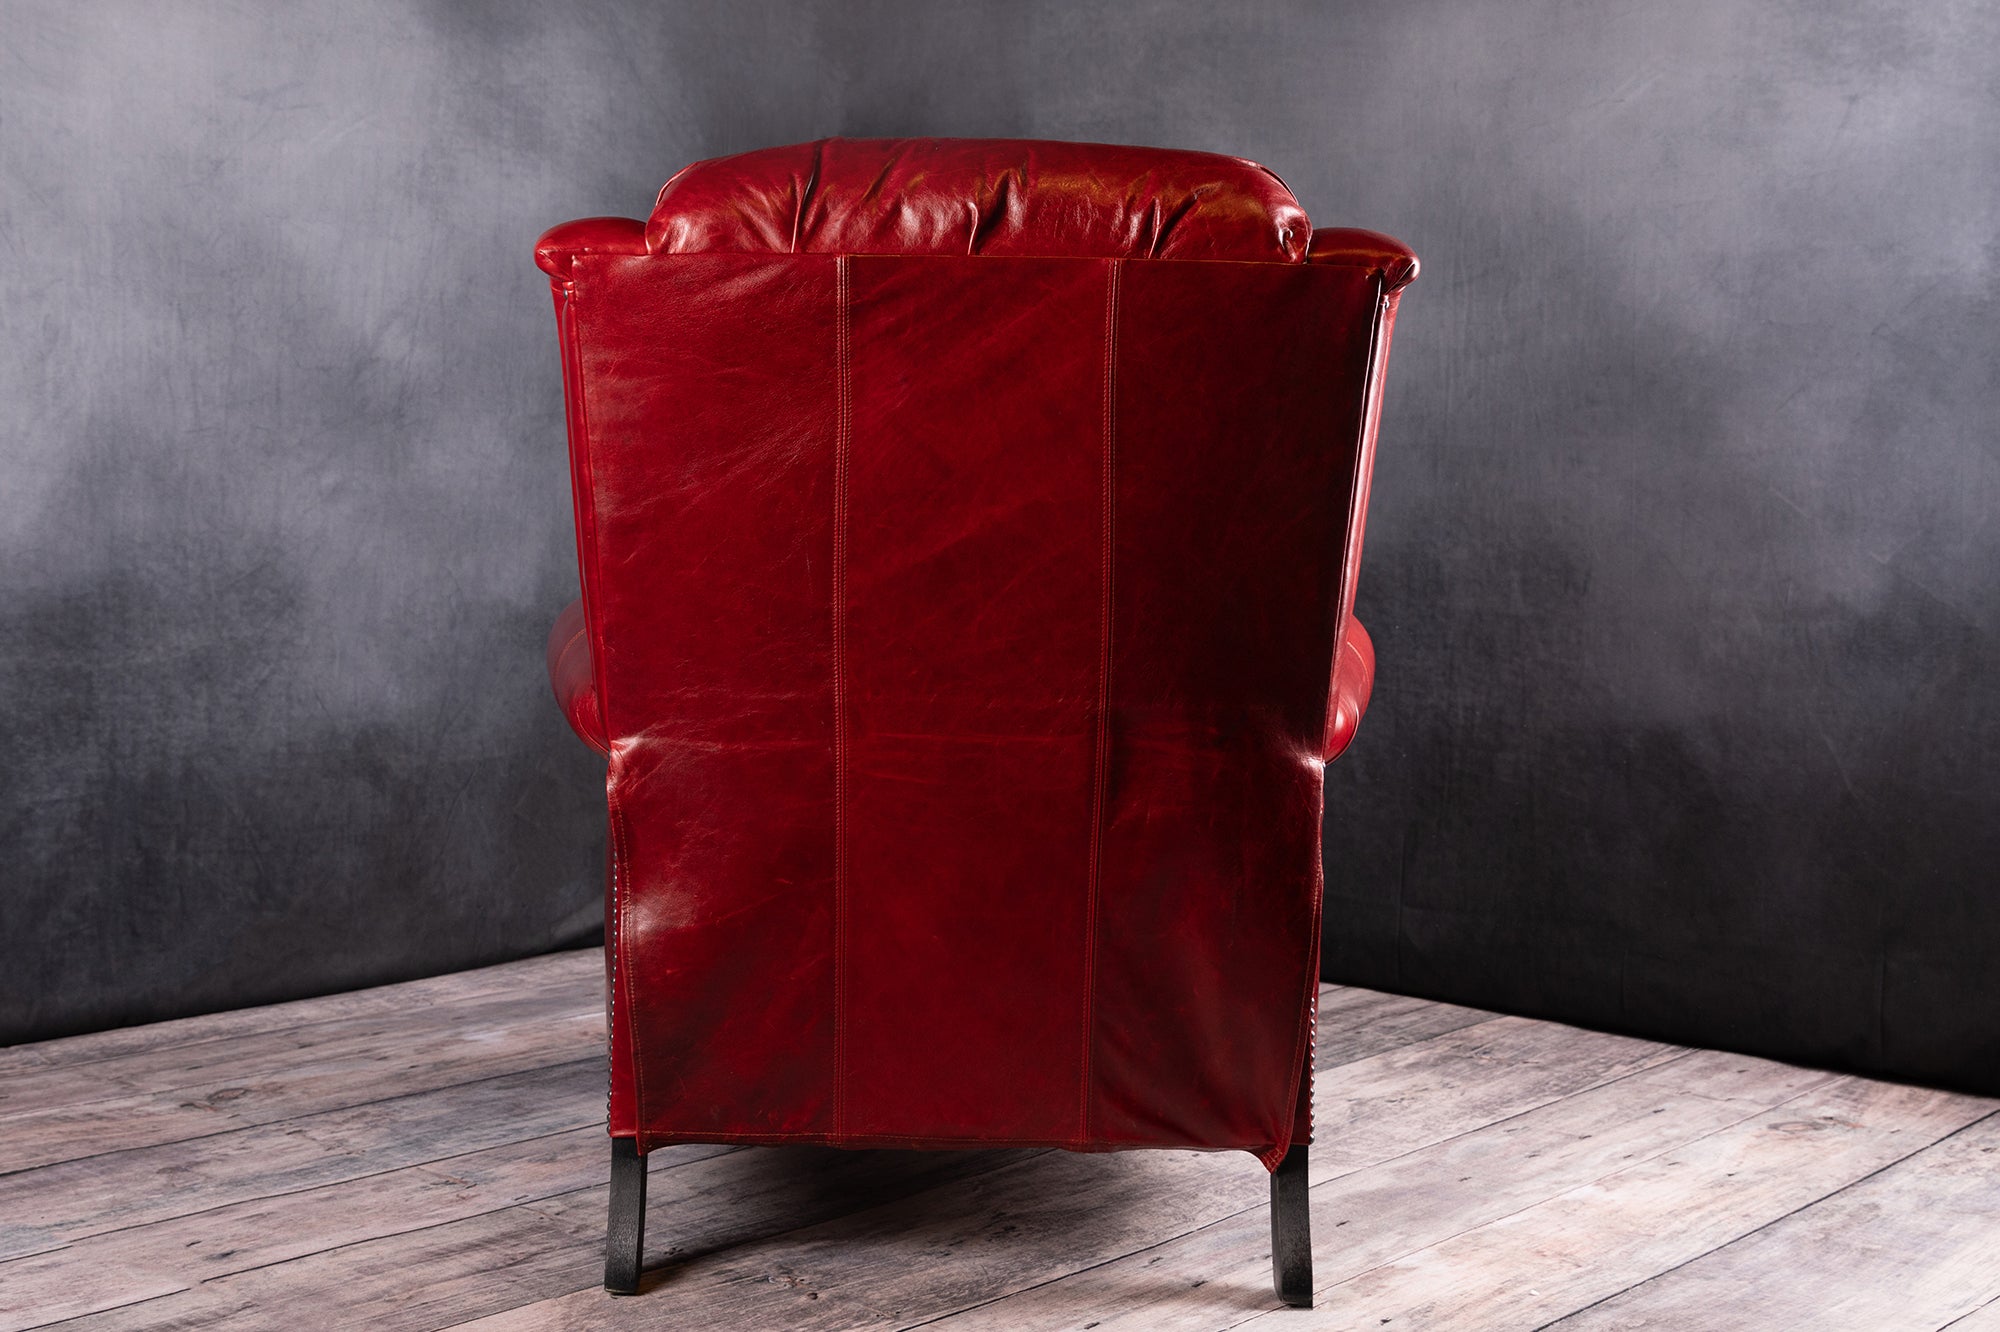 KING RECLINER RED CHAIR